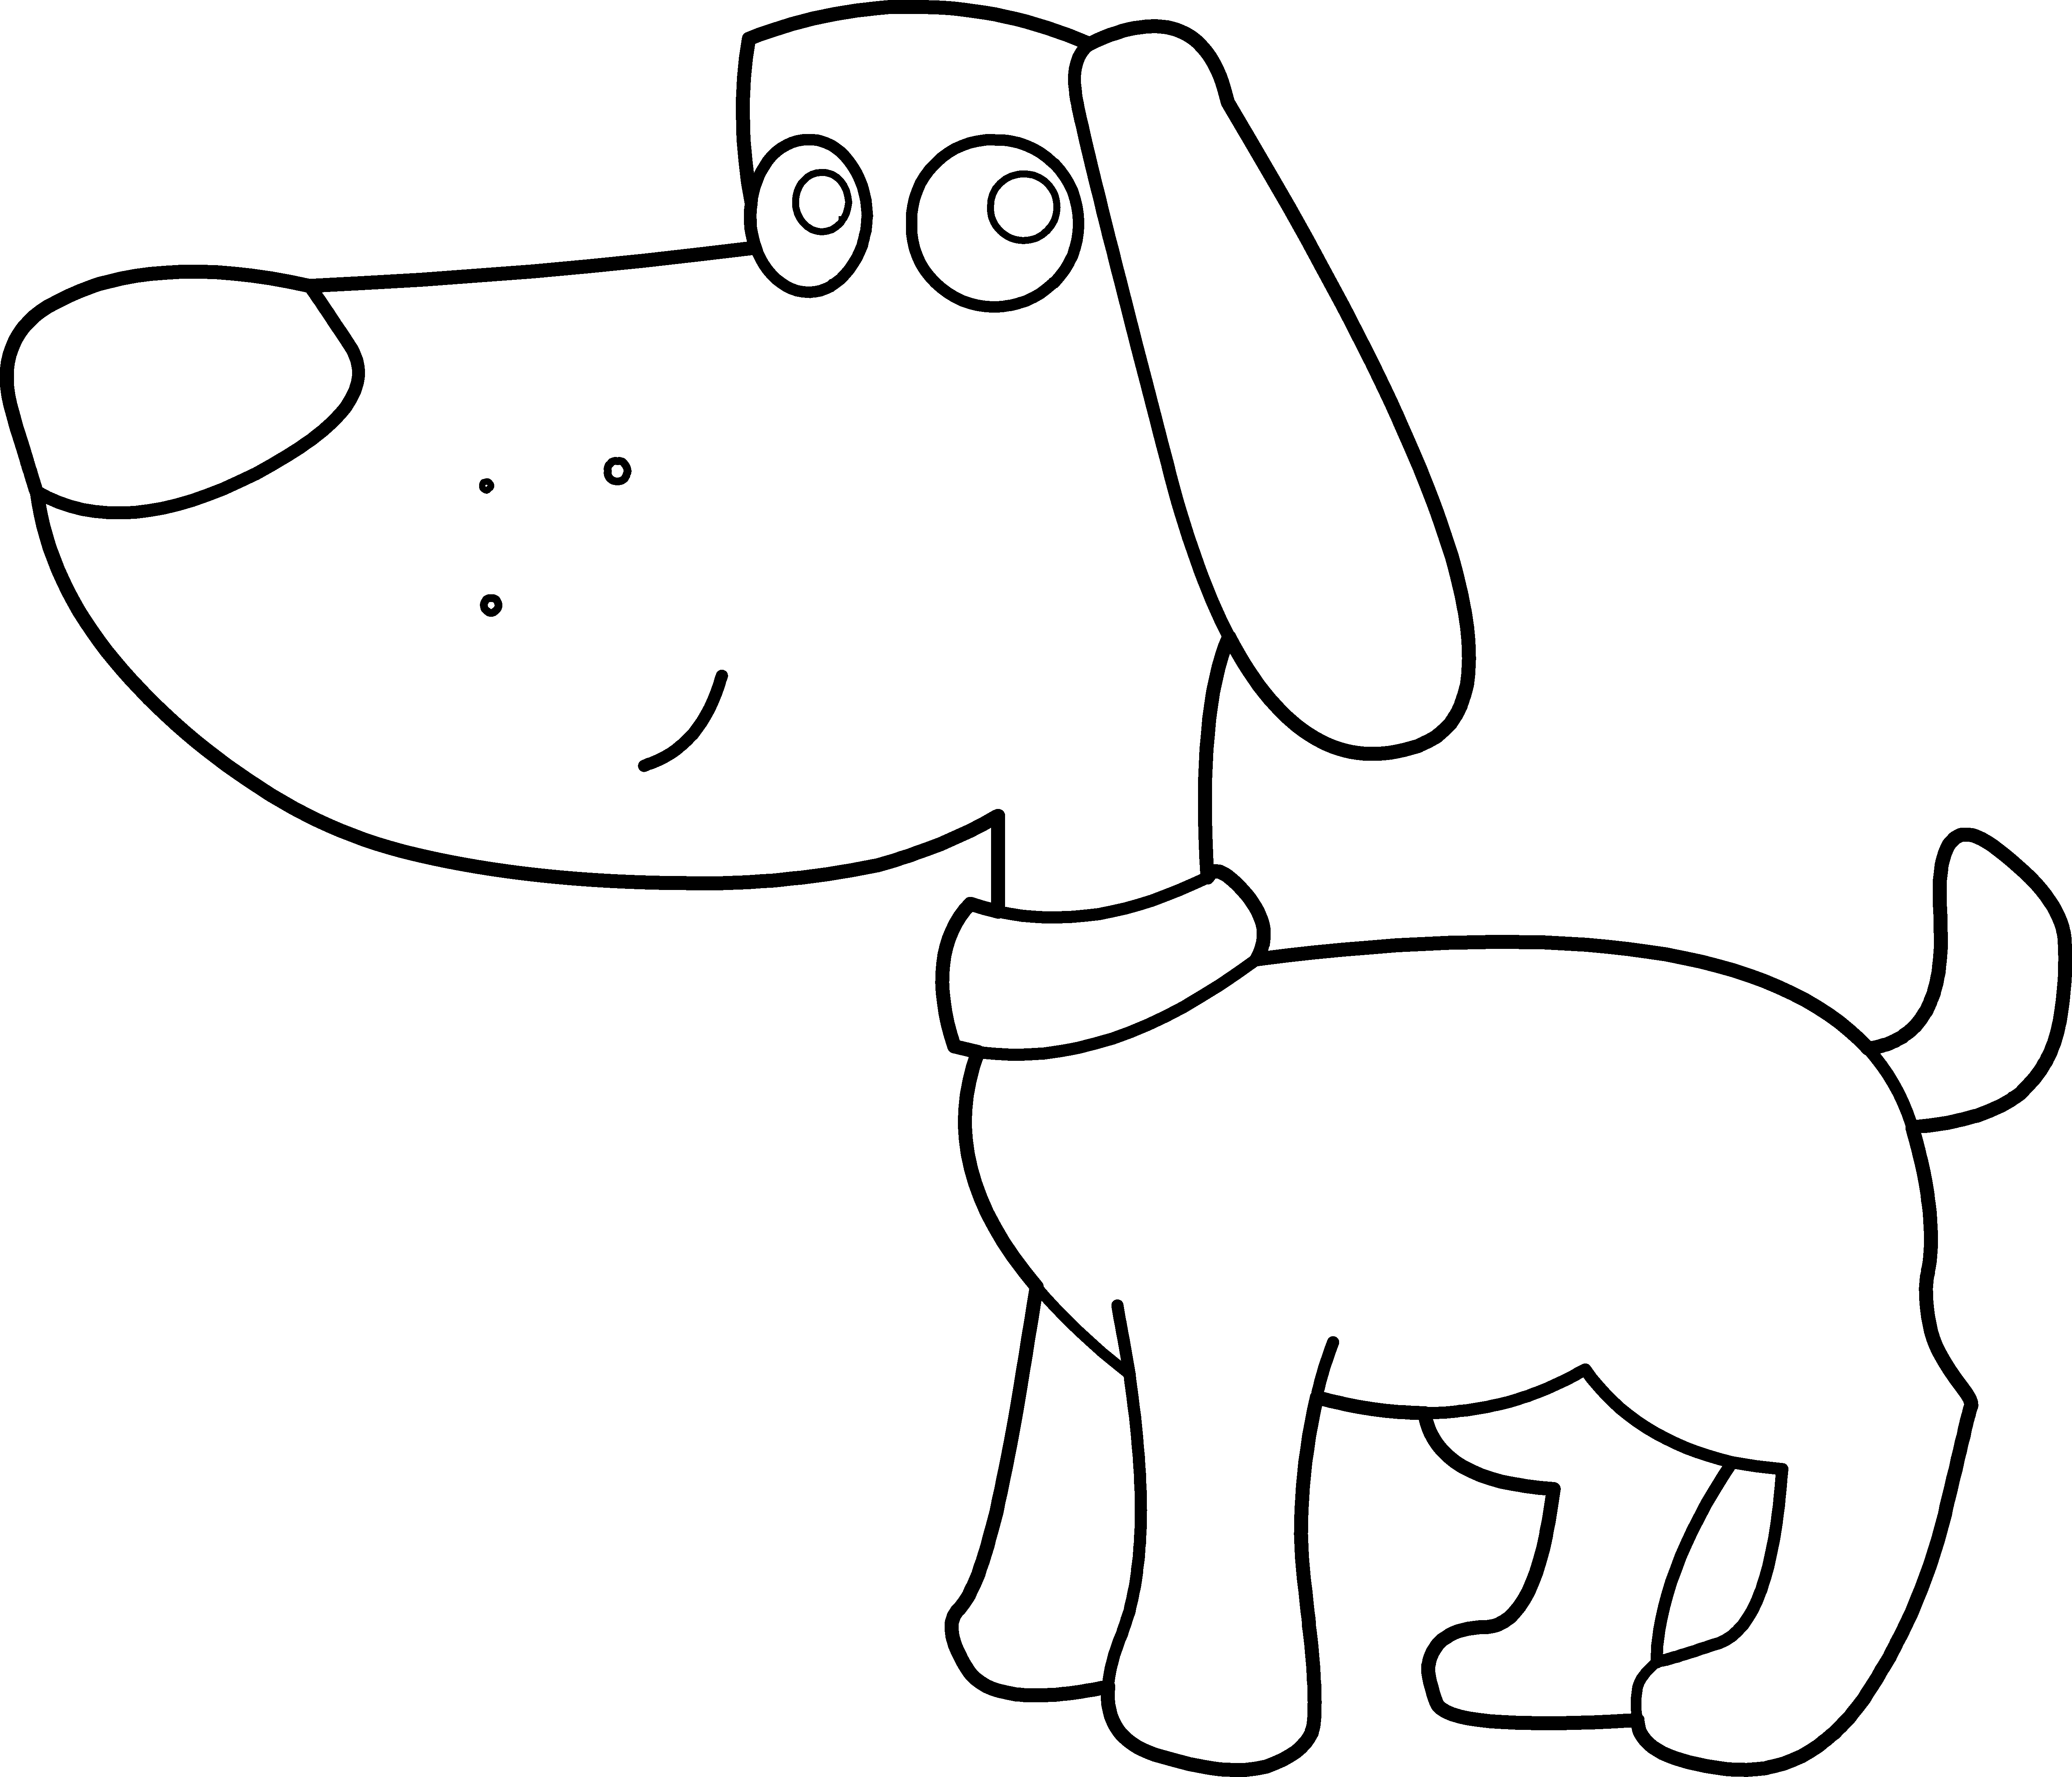 Dog And Cat Clip Art Black And White - Free ...